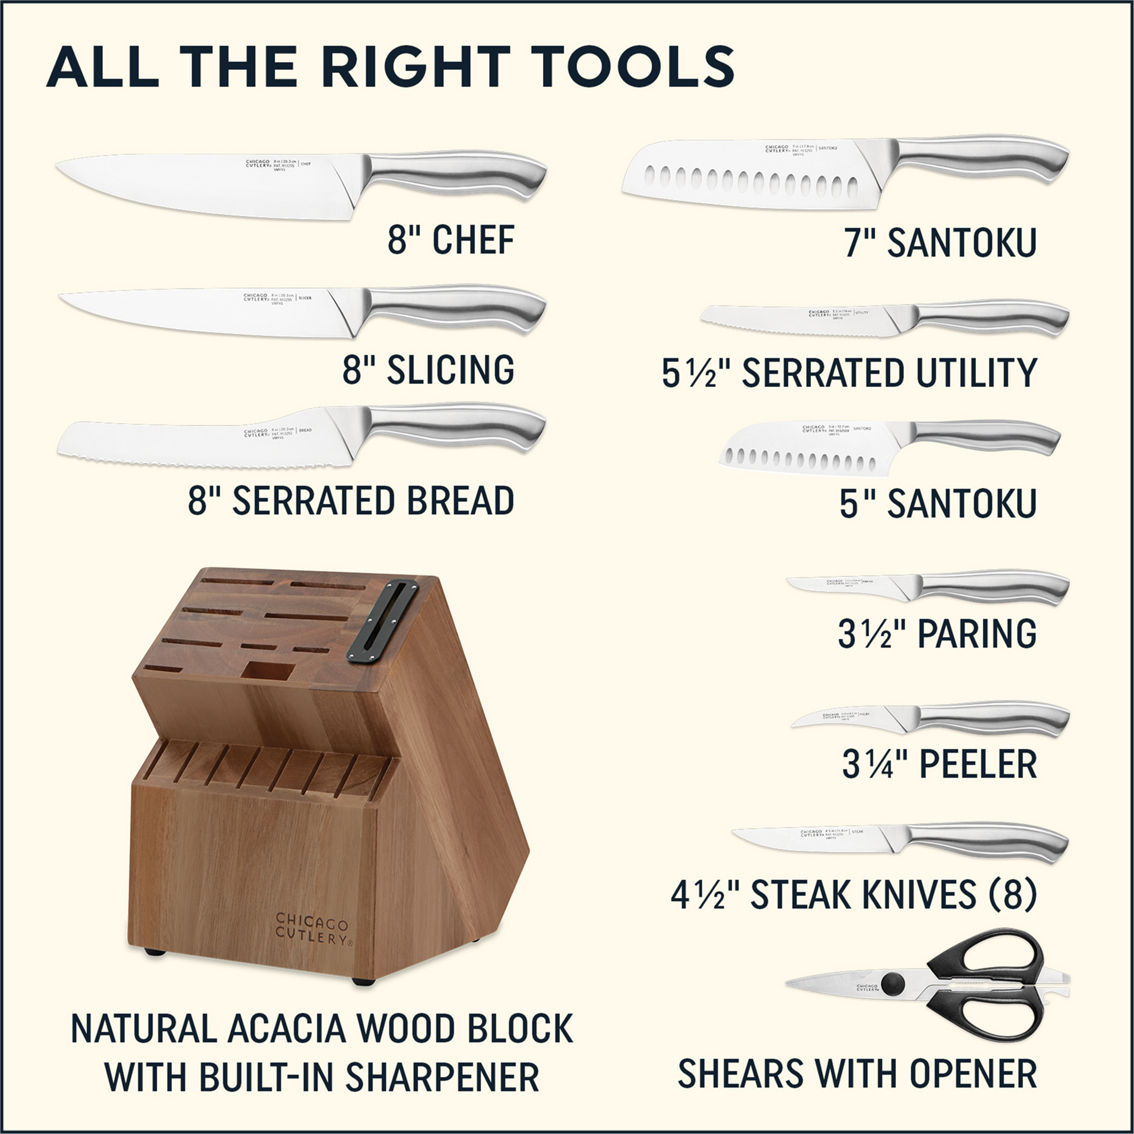 Chicago Cutlery Insignia Stainless Steel 18 pc. Knife Block Set - Image 2 of 2